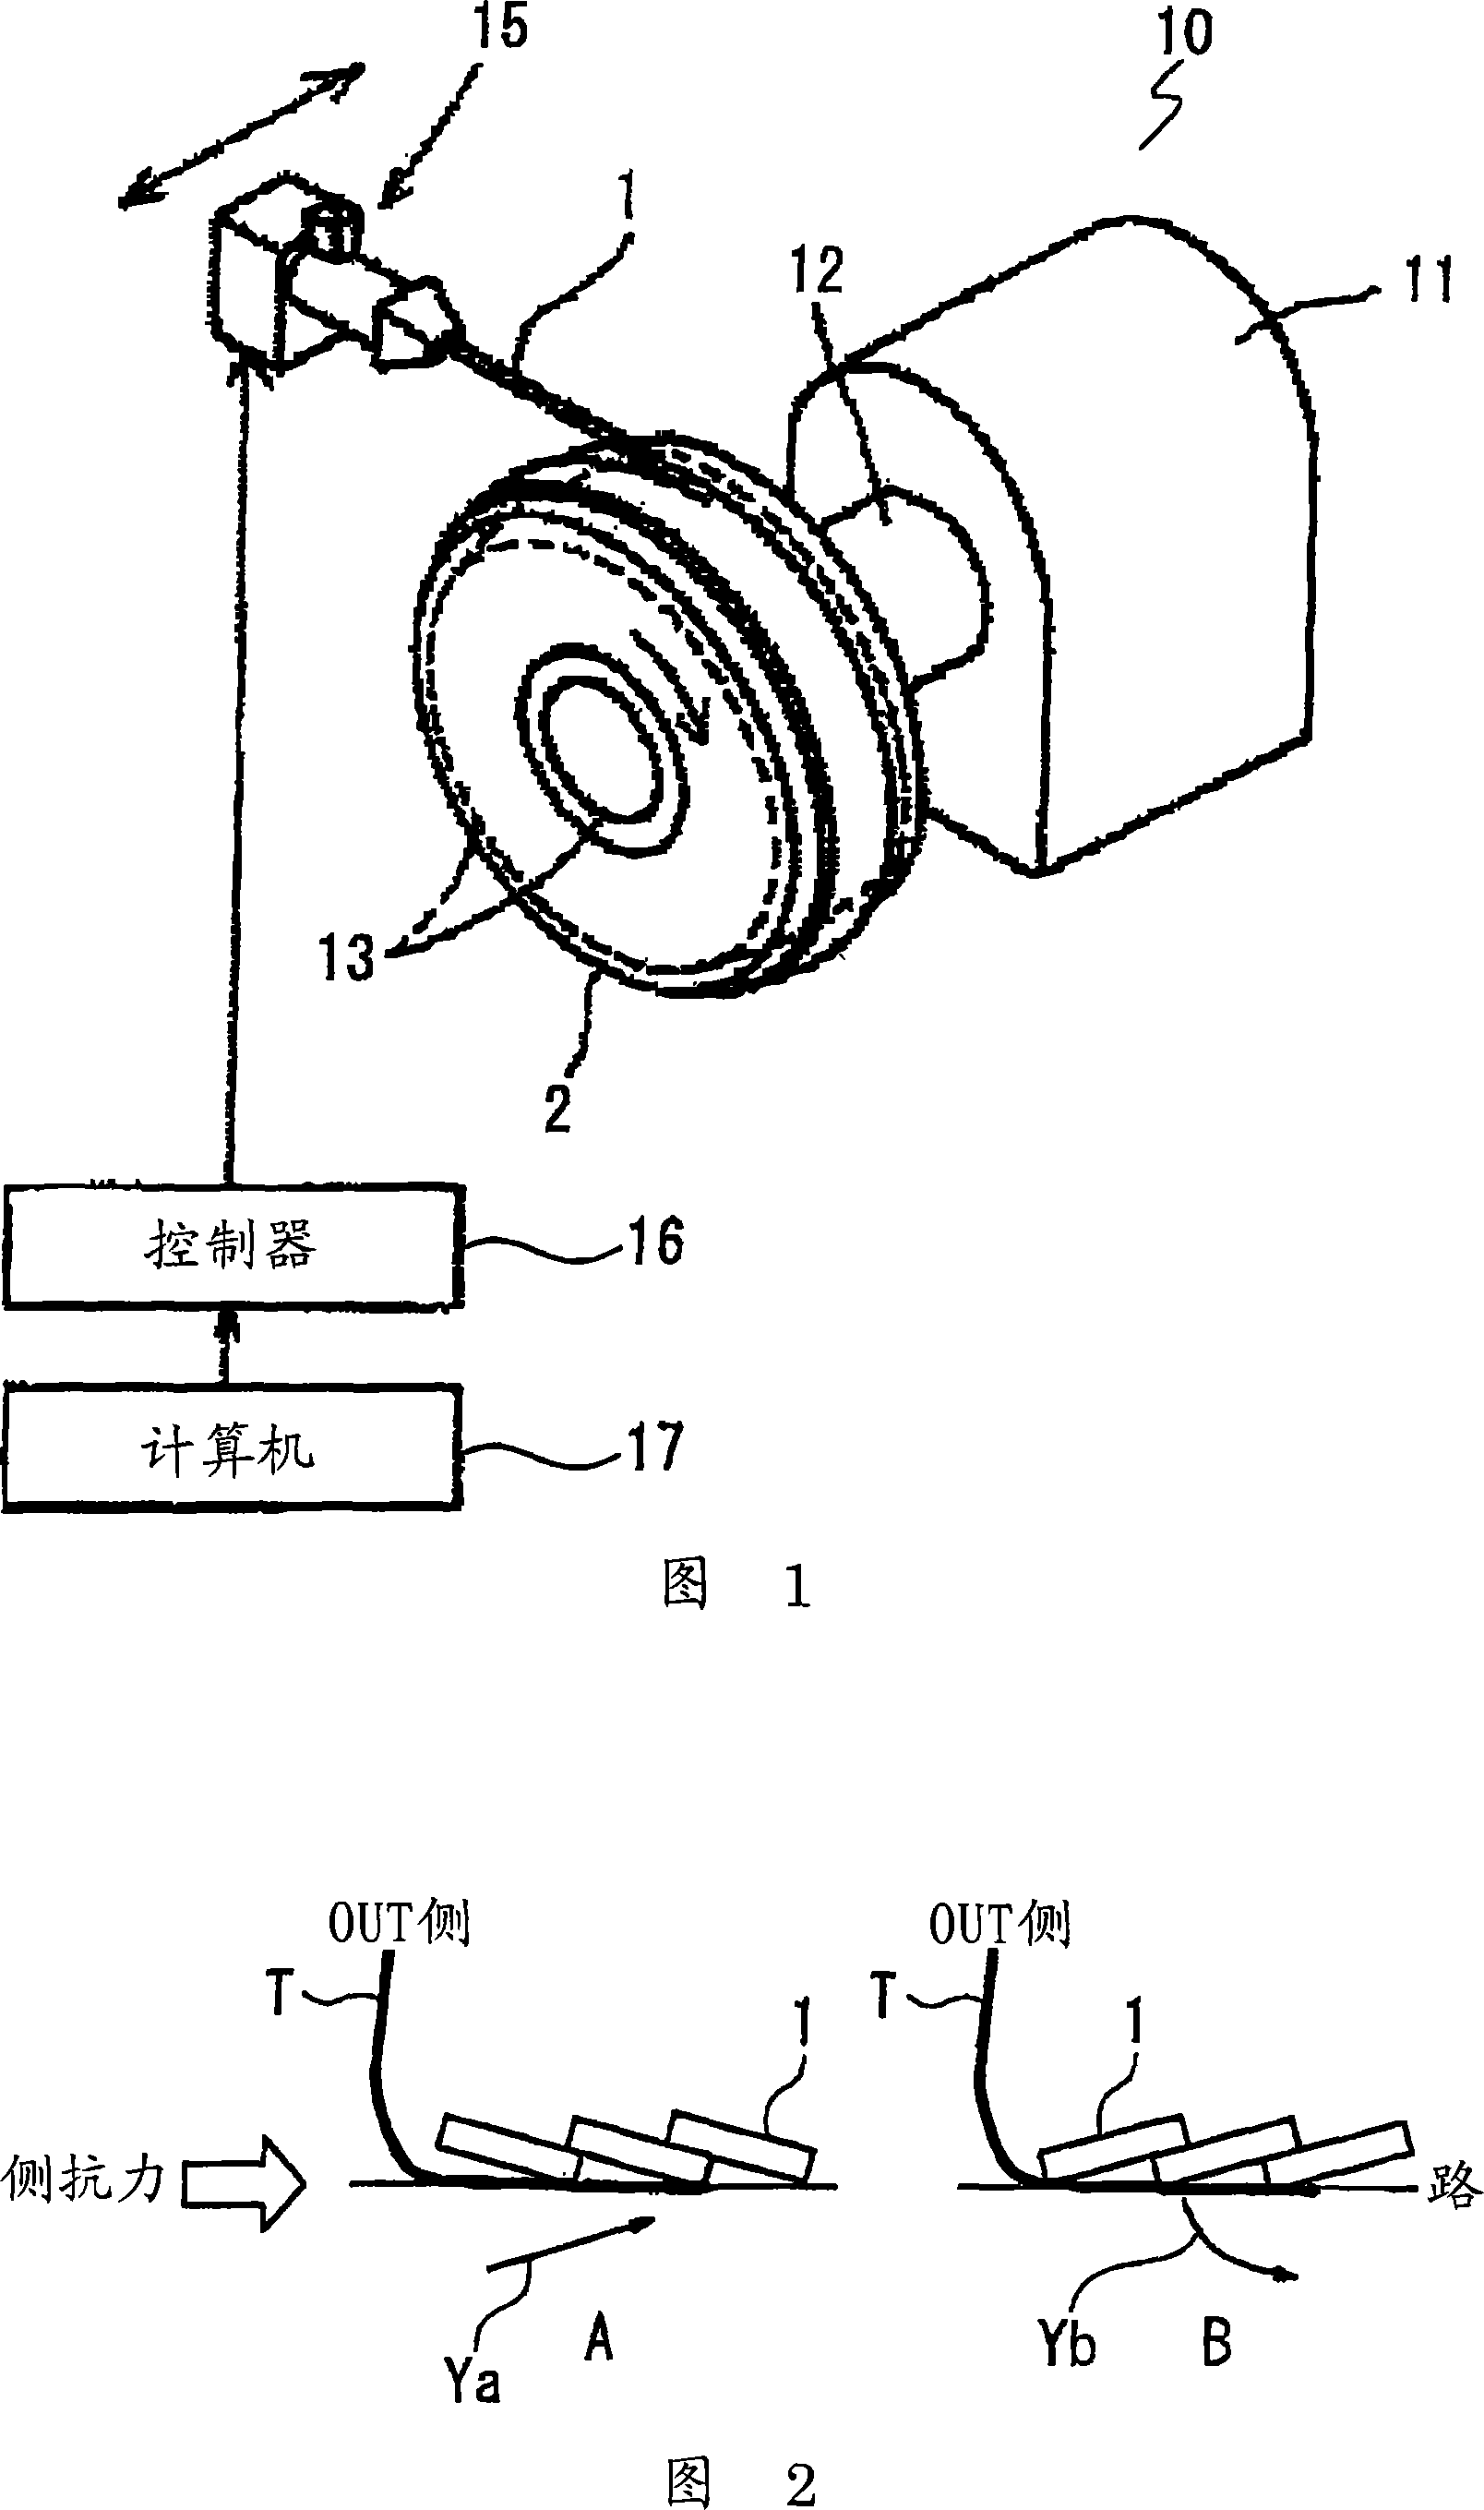 Pneumatic tire, arrangement structure of the tire, and method of manufacturing the tire